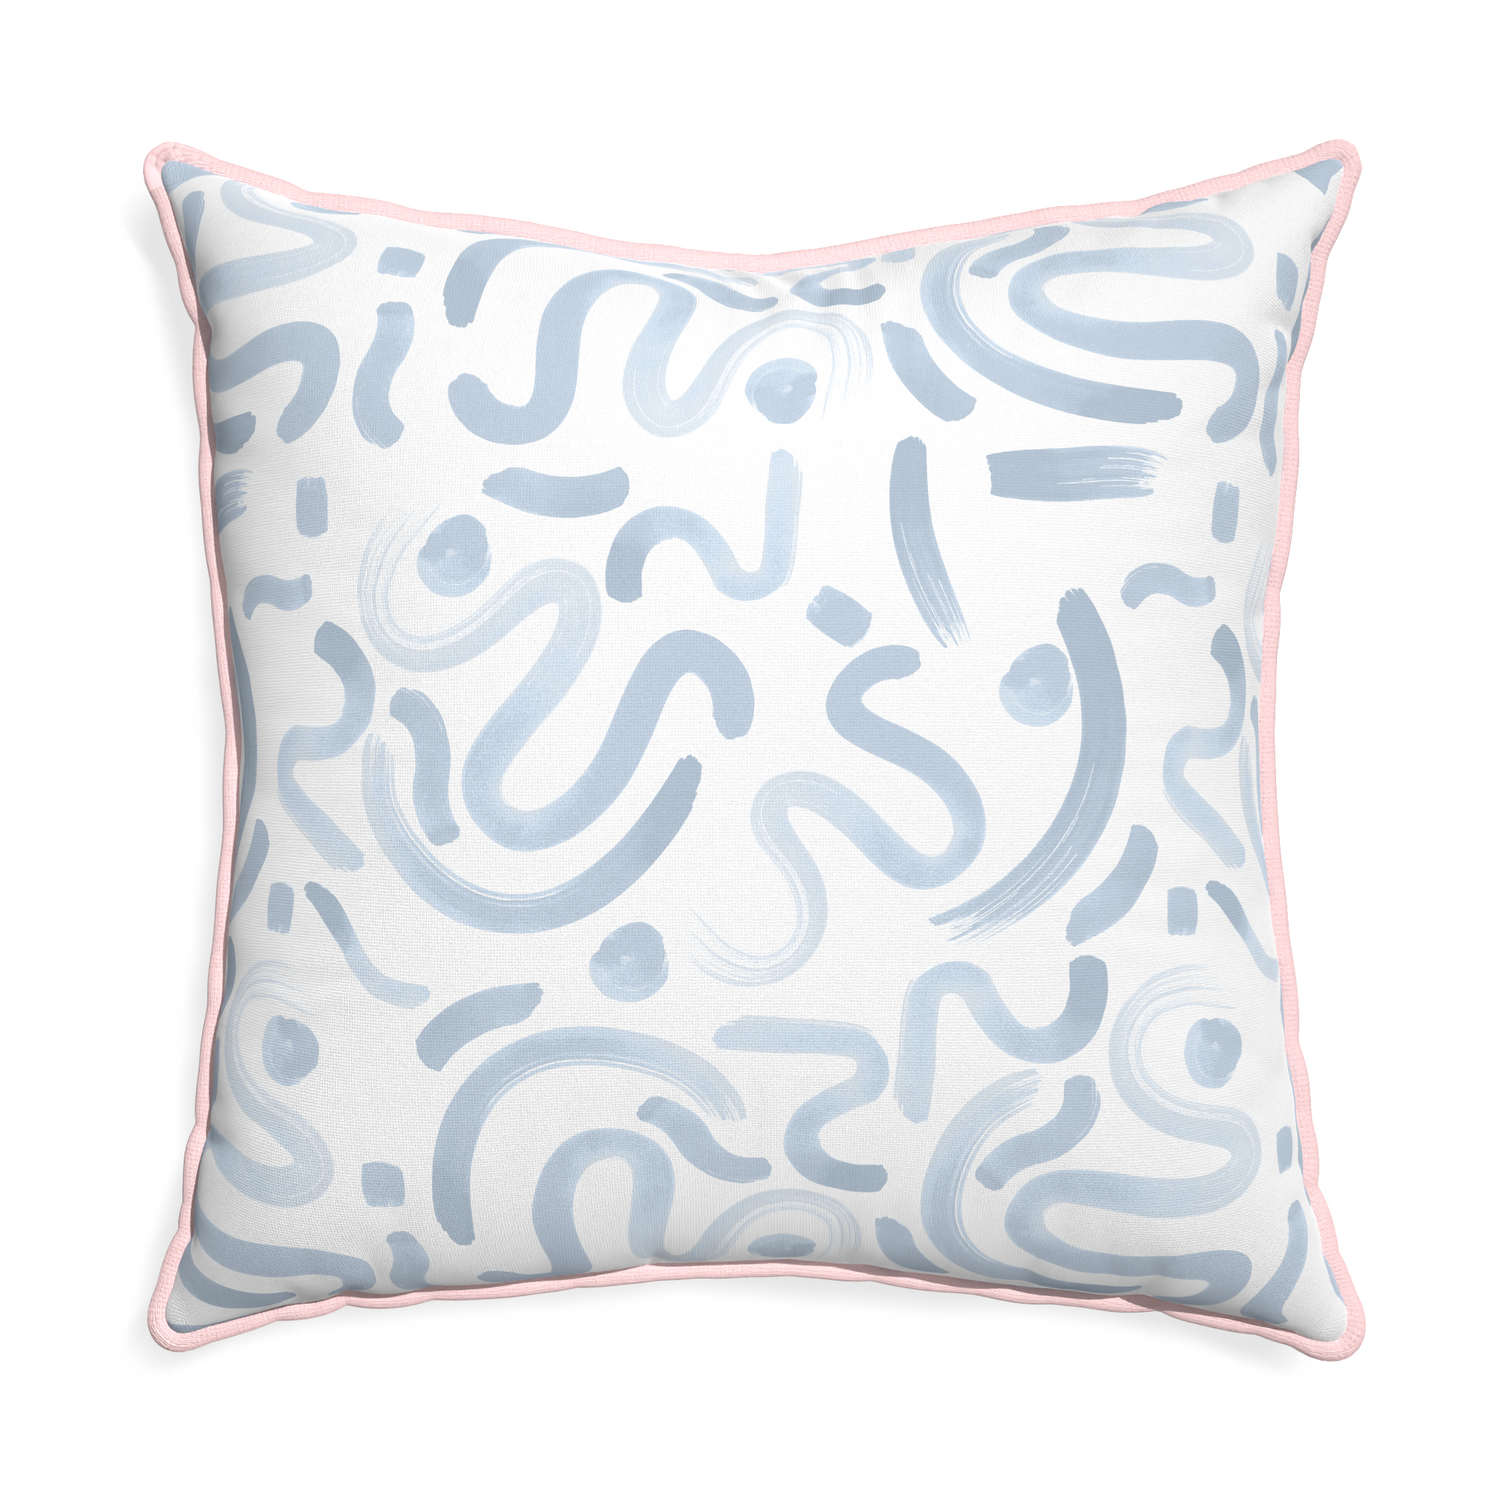 Euro-sham hockney sky custom pillow with petal piping on white background